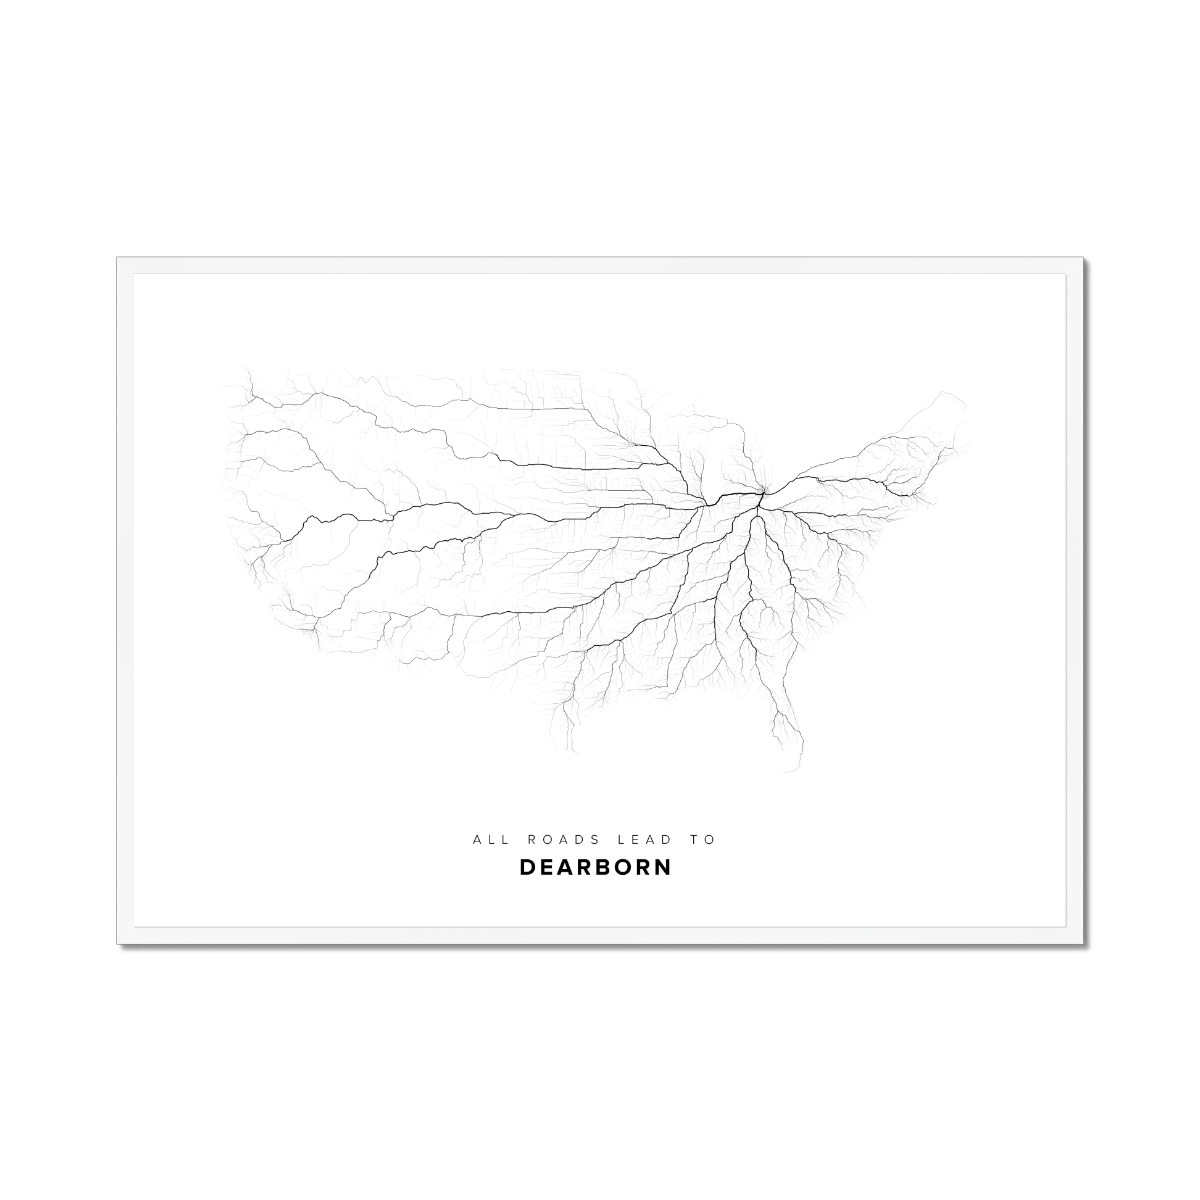 All roads lead to Dearborn (United States of America) Fine Art Map Print